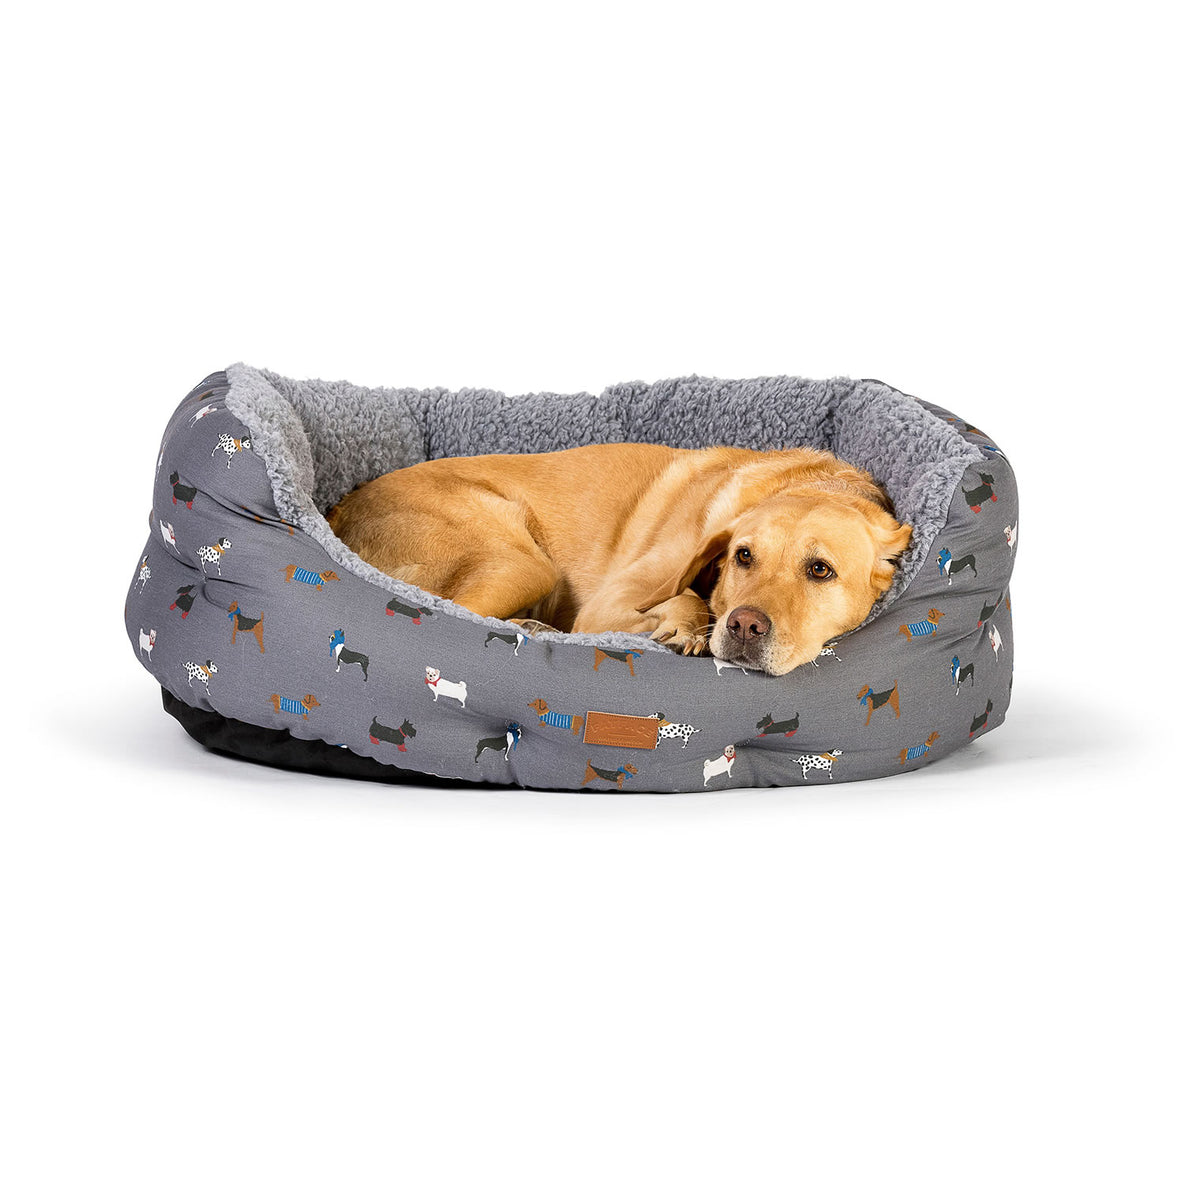 Dog Beds - Danish Design Fatface Marching Dogs Deluxe Slumber Bed in Grey